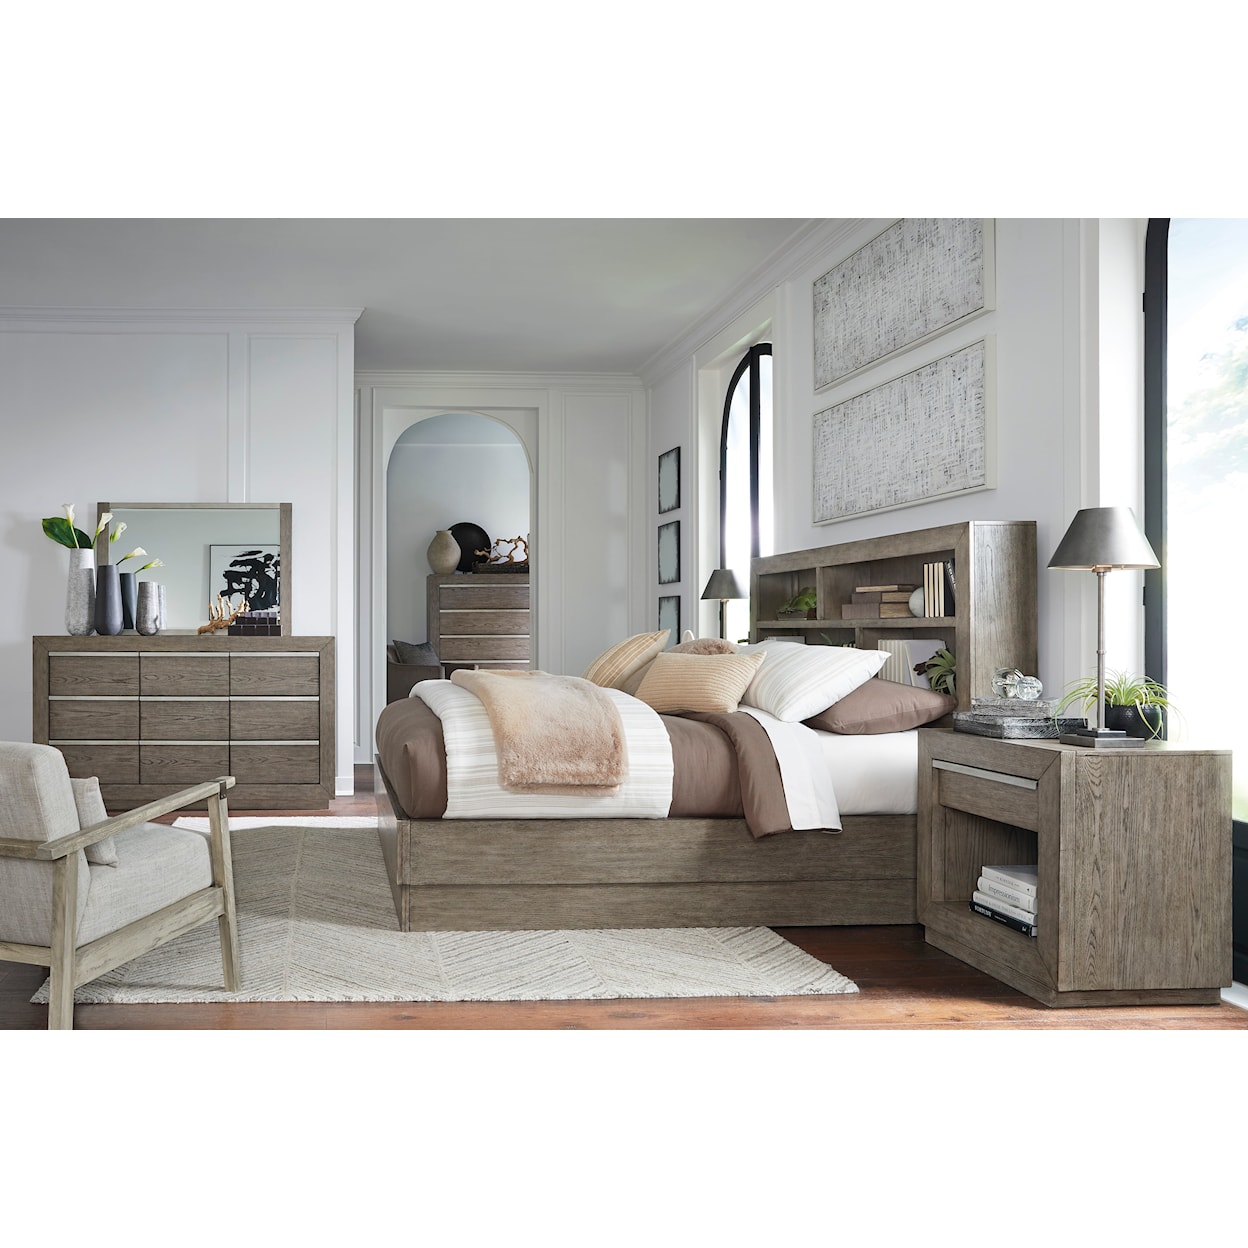 Benchcraft by Ashley Anibecca Queen Bedroom Set